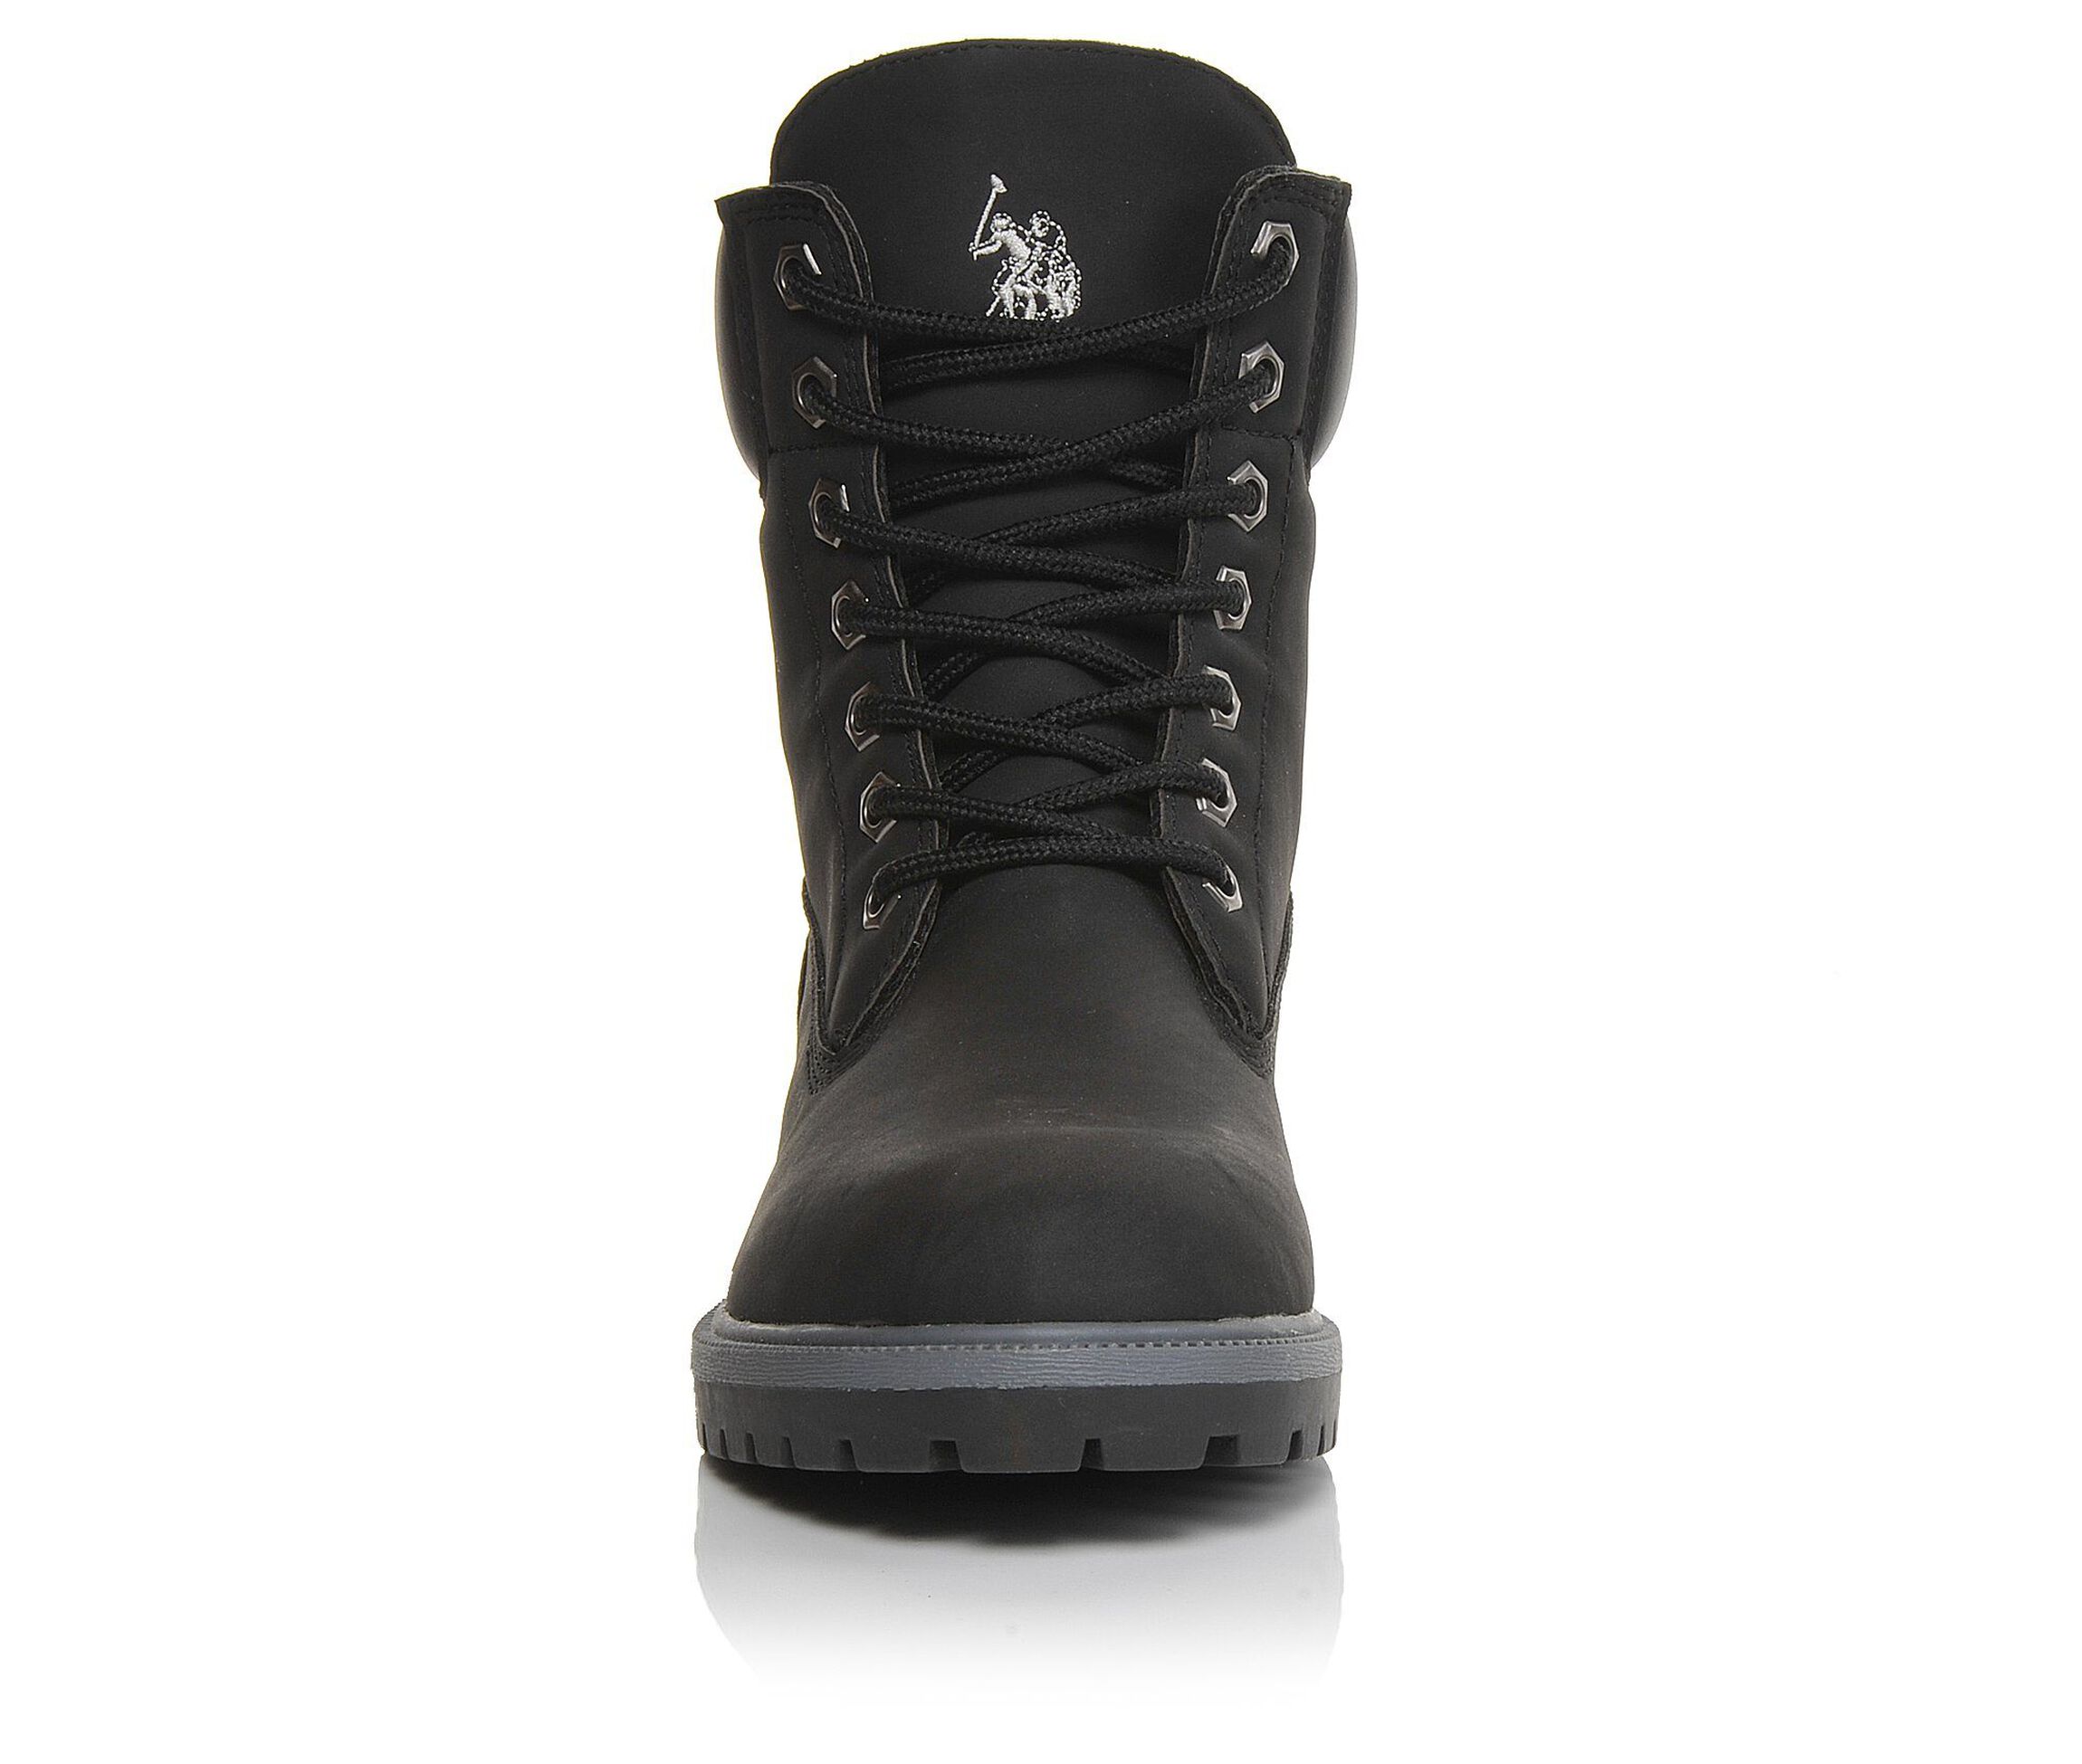 Combat Boots for Women, Lace-Up Boots | Shoe Carnival